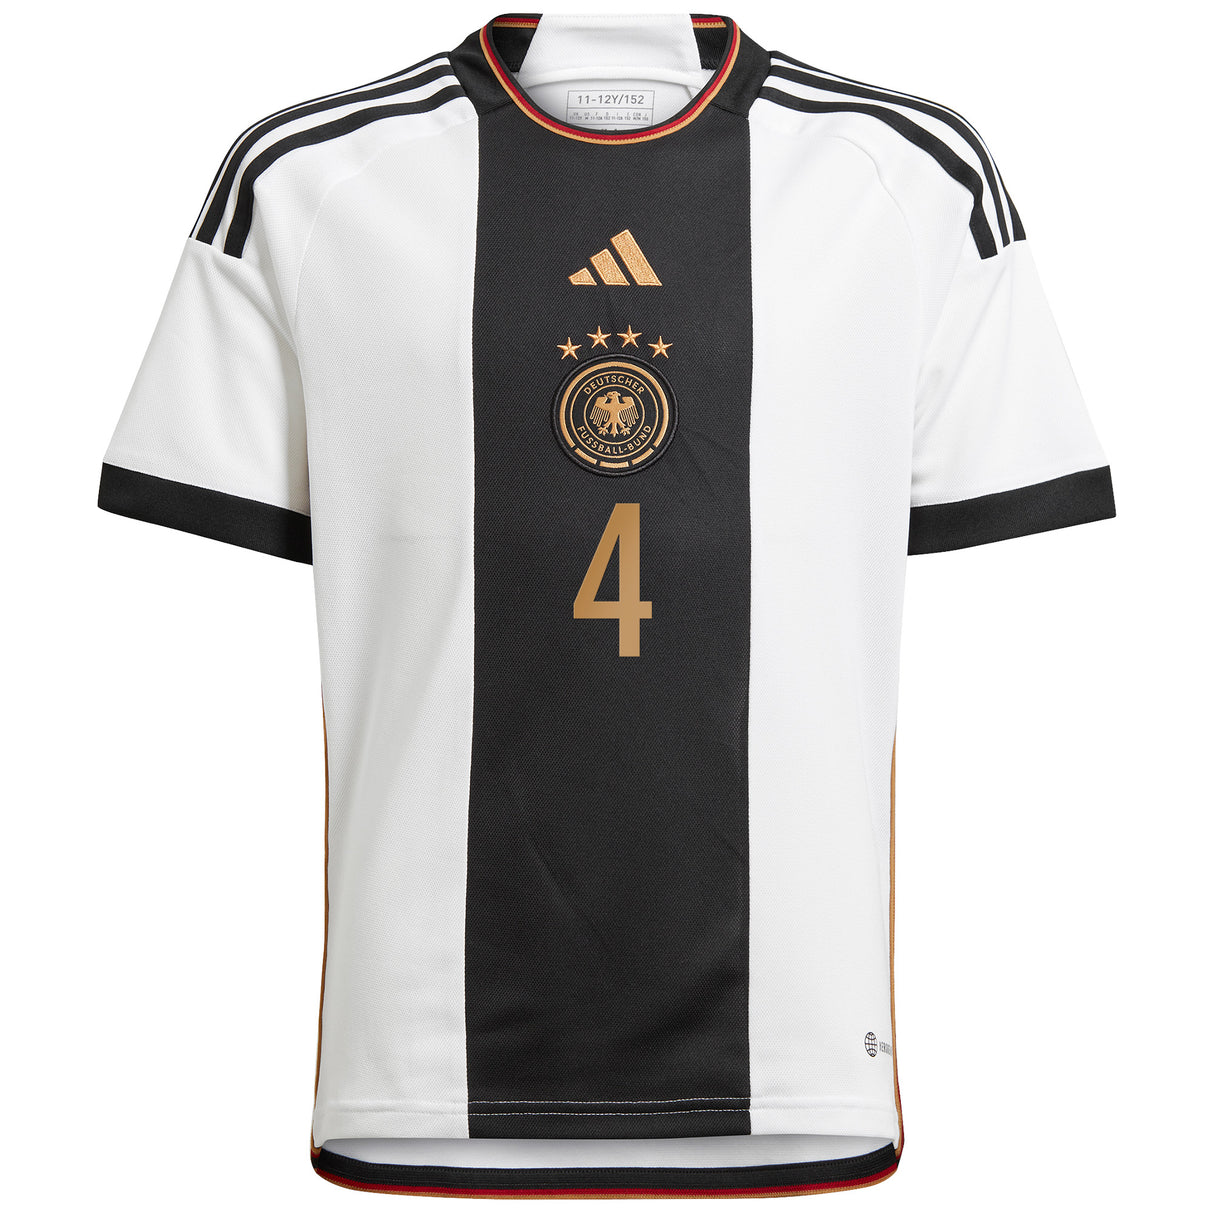 Germany Home Shirt - Kids with Ginter 4 printing - Kit Captain